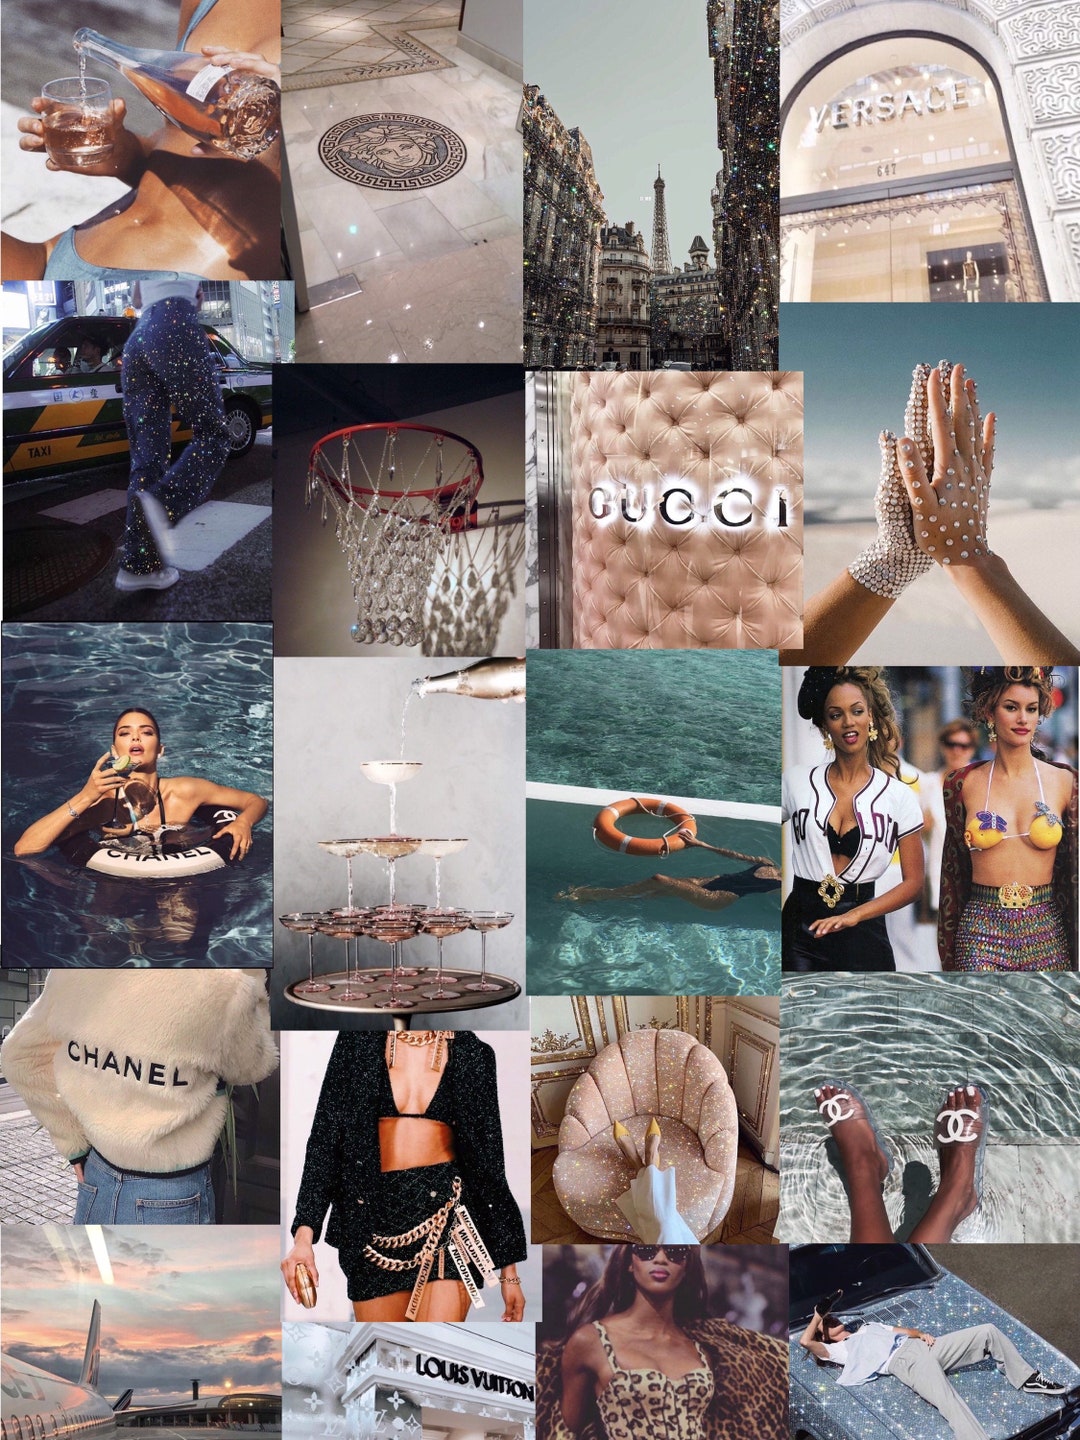 A collage of photos including a Versace store front, a woman holding a Chanel bag, a woman in a bikini on a boat, and a woman in a bikini holding a basketball. - Fashion